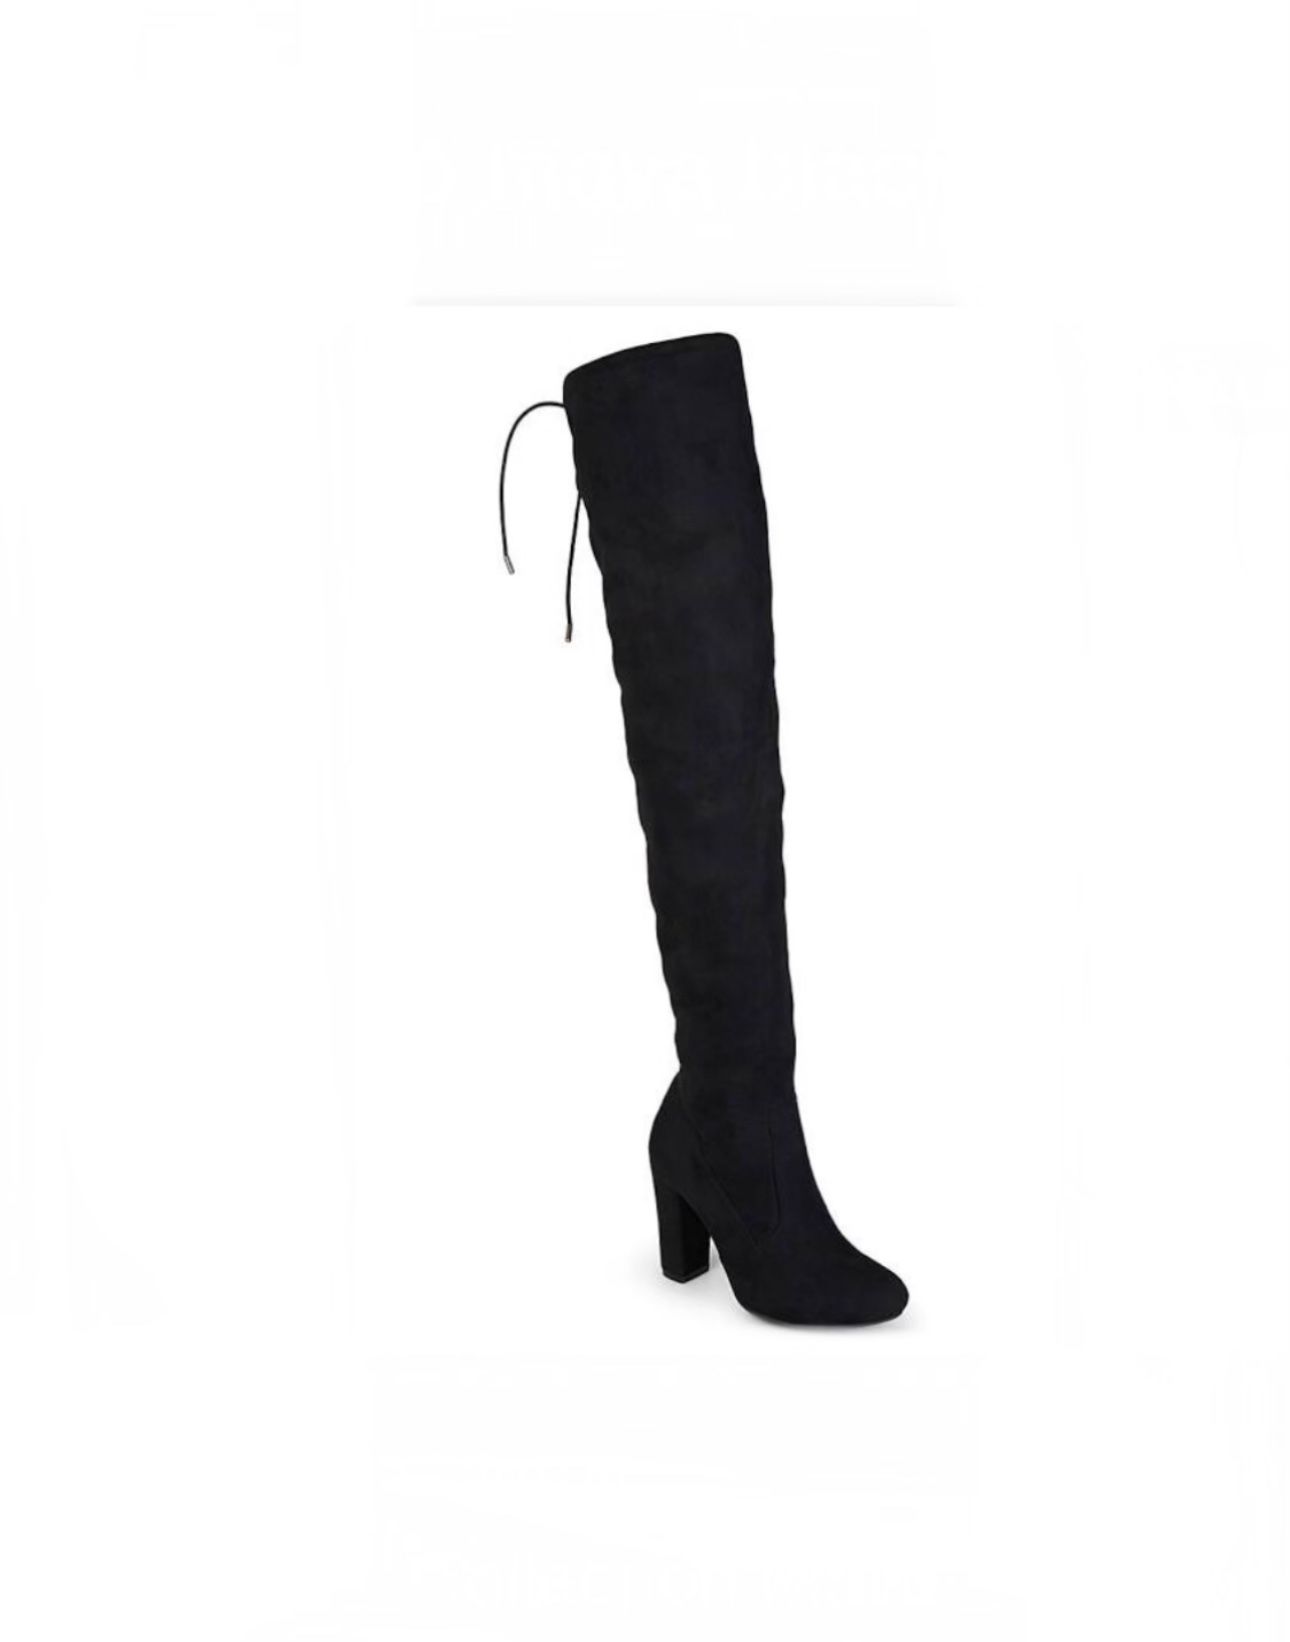 Size 8.5 Woman’s Boot Thigh High